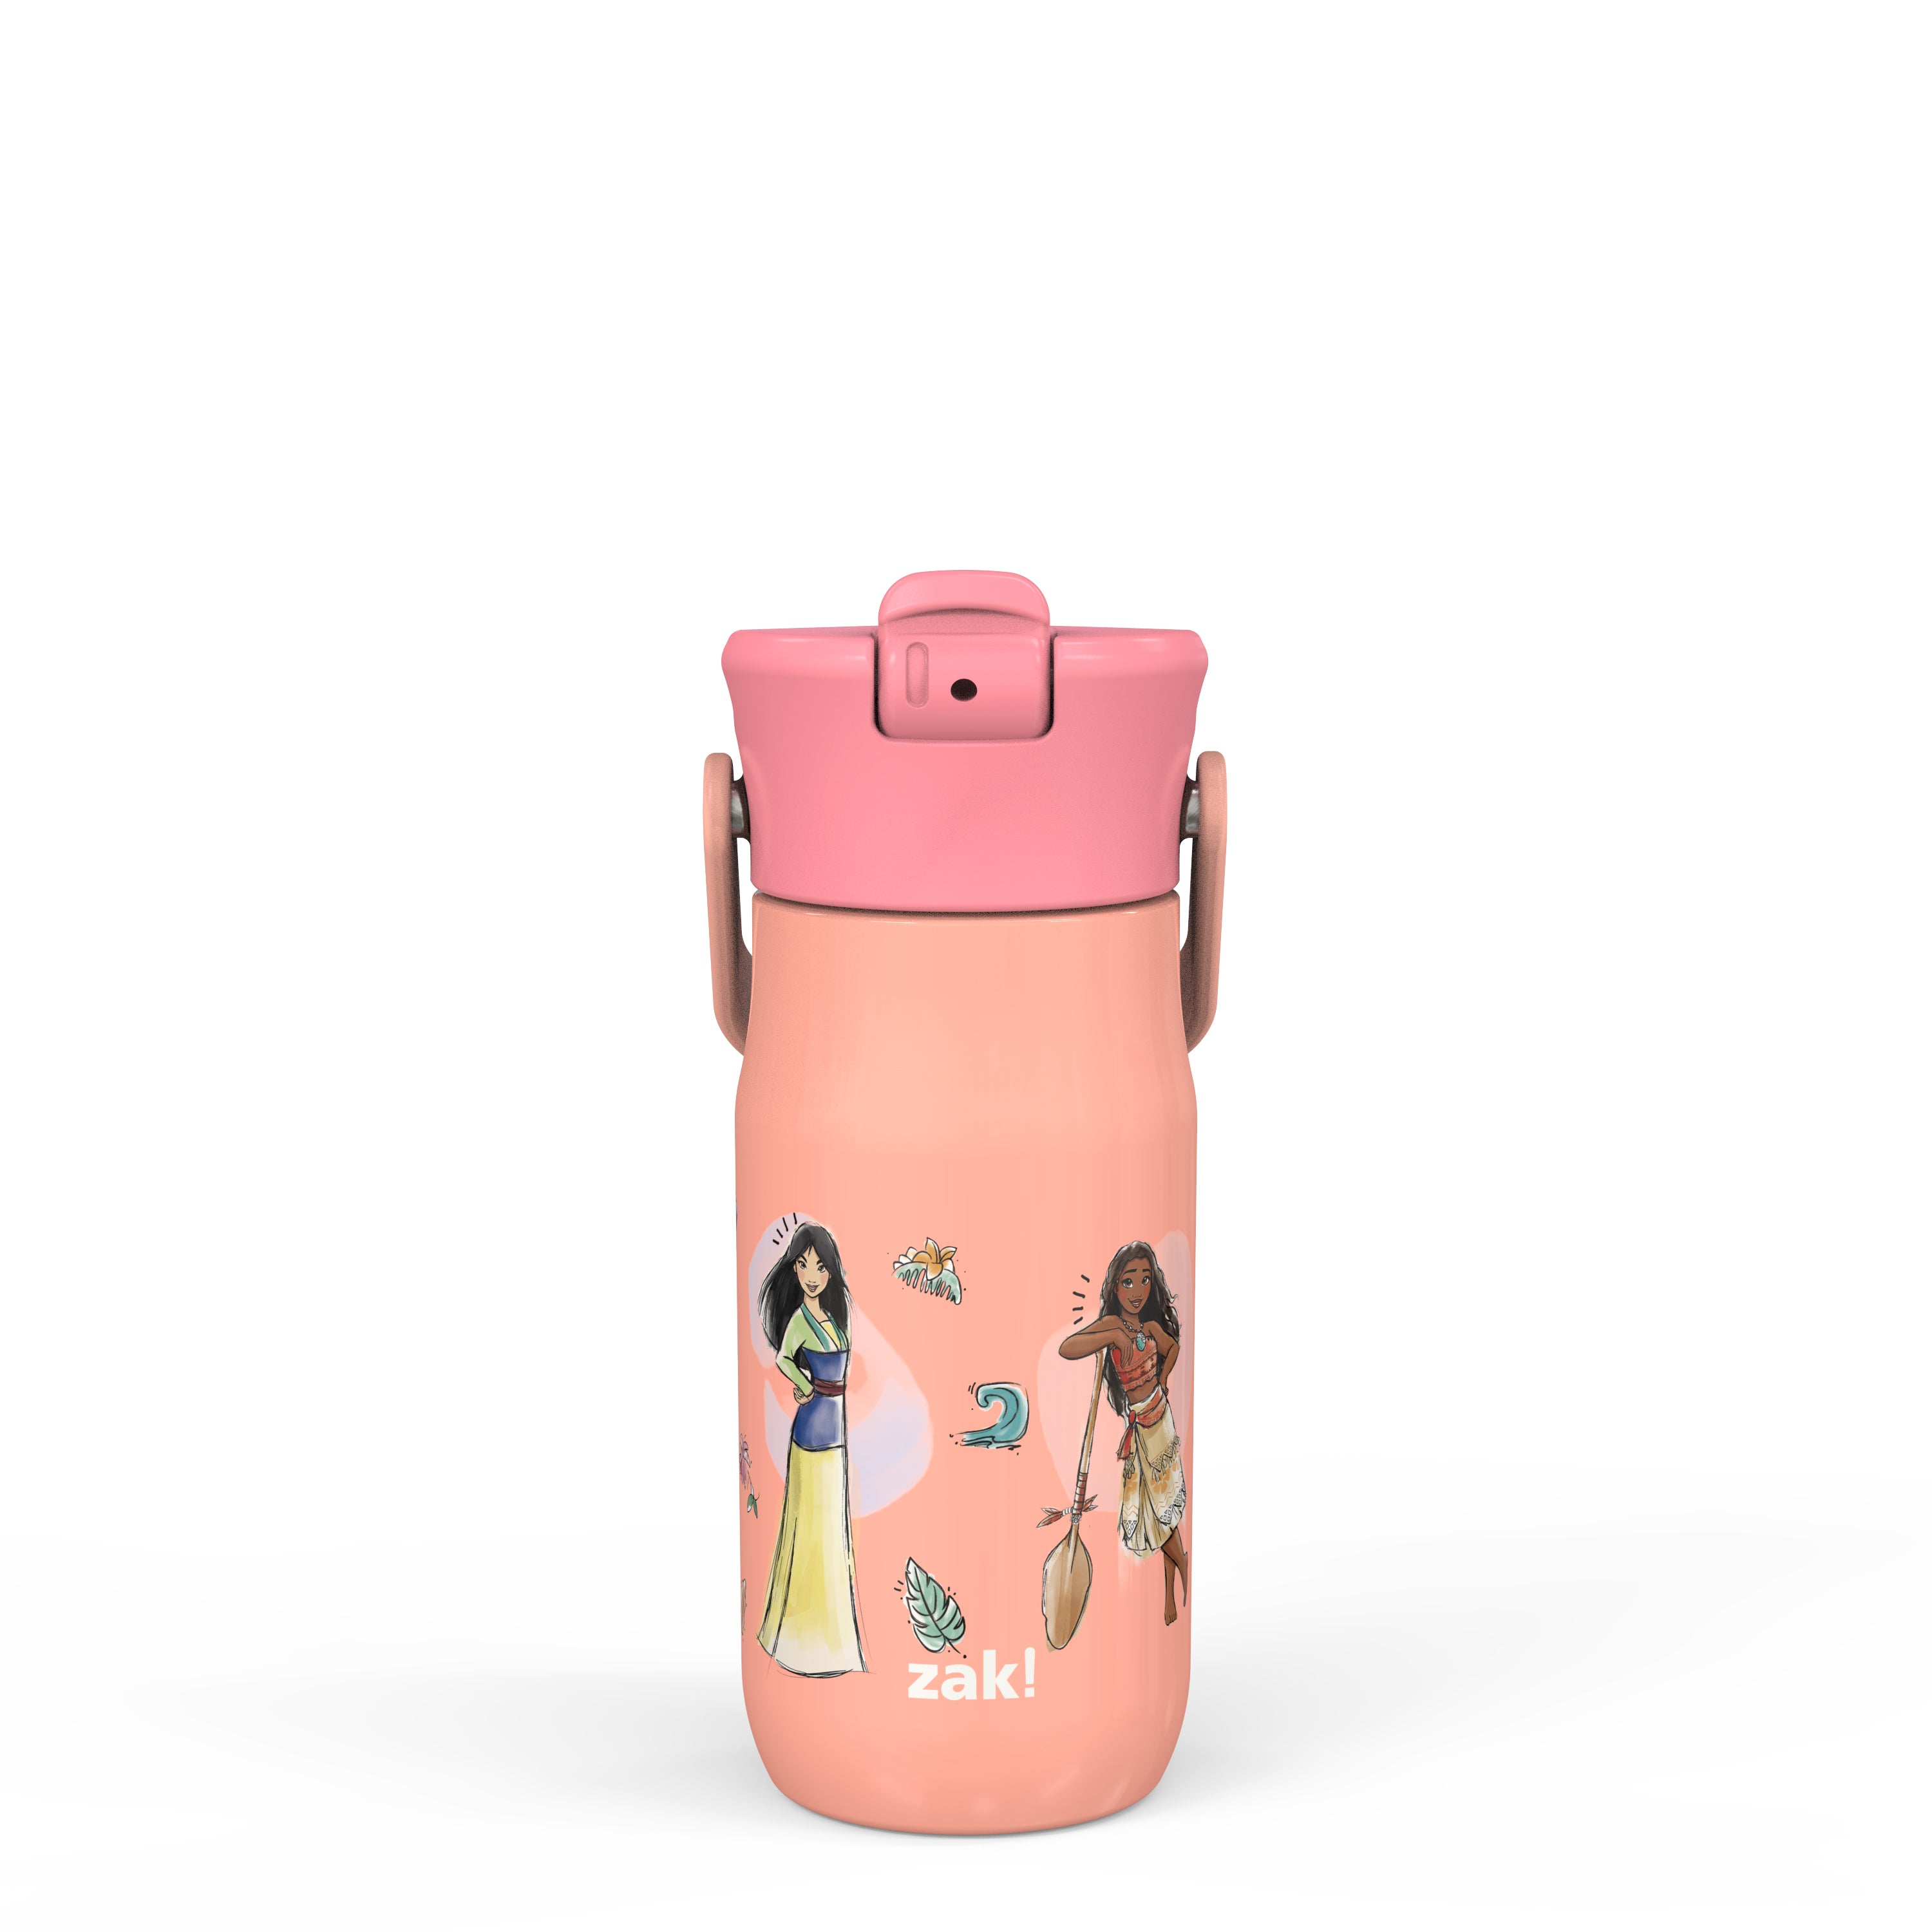 Disney Princess Harmony Recycled Stainless Steel Kids Water Bottle with Straw Spout, 14 ounces